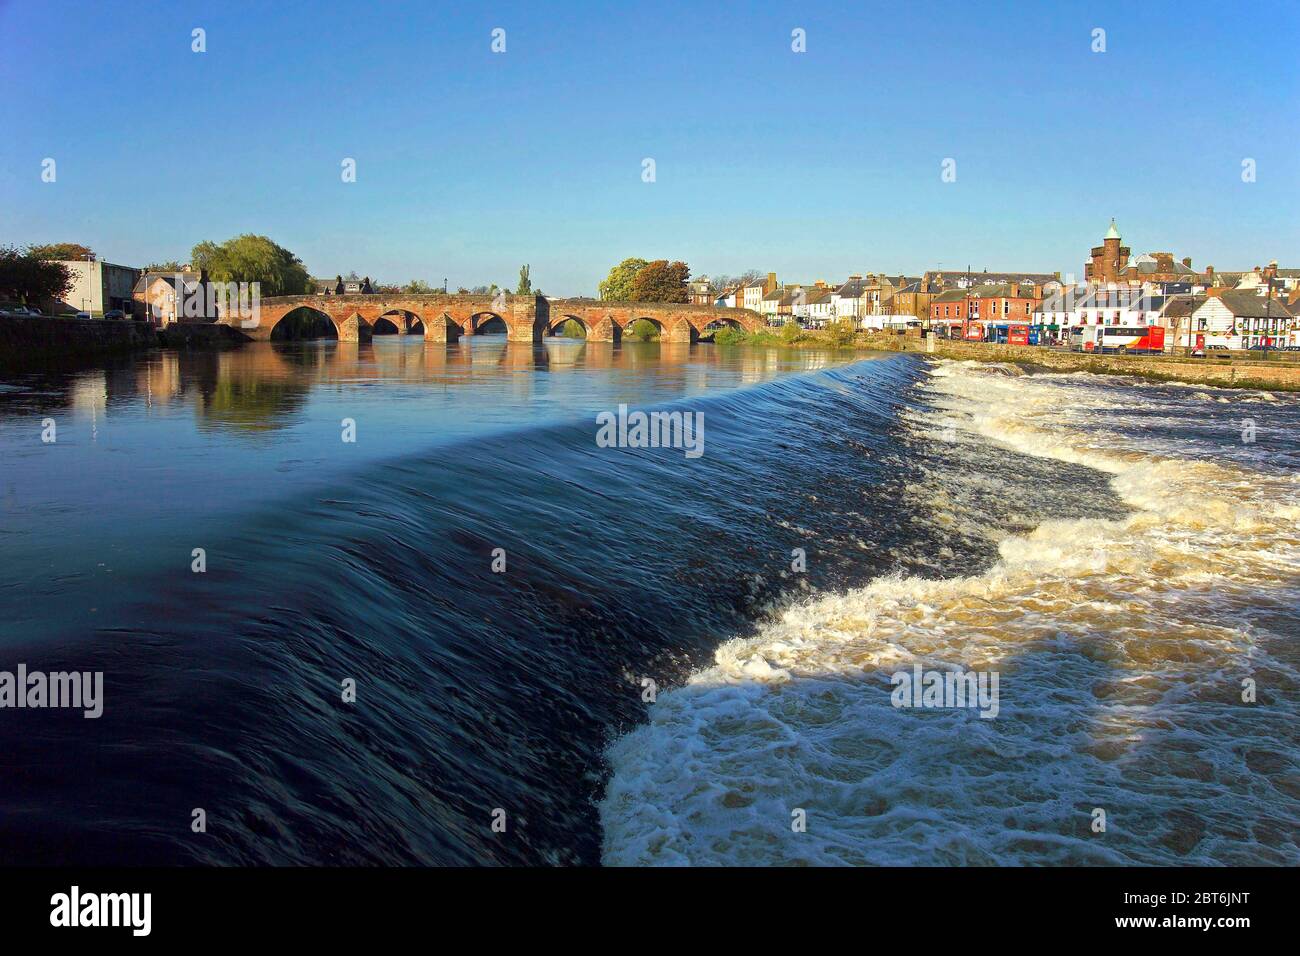 The Caul and The Auld Brig - Dumfries Stock Photo